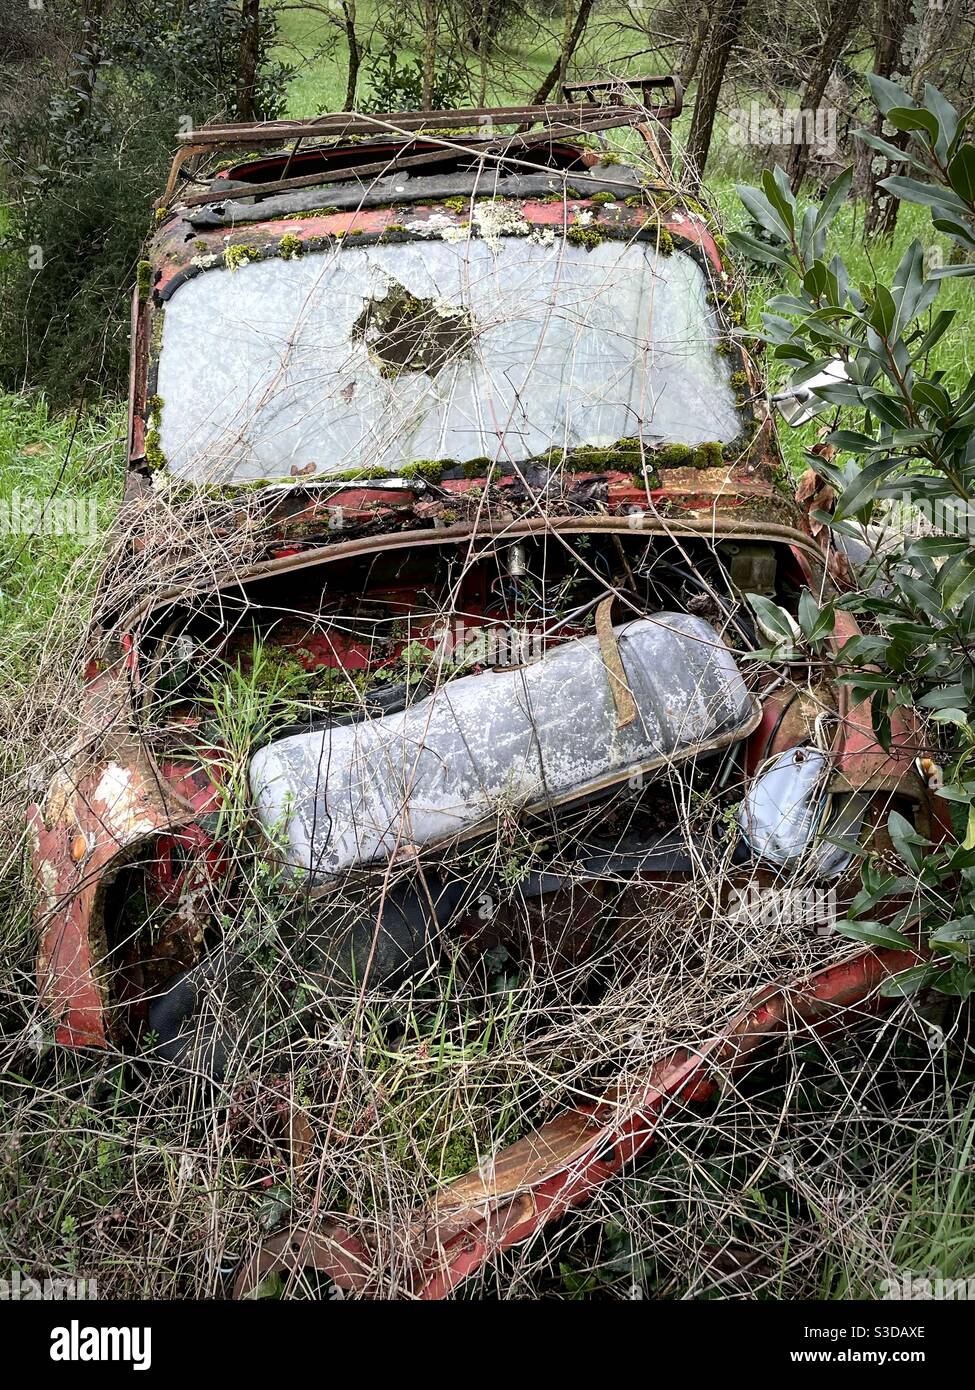 Vintage old Fiat 500 car abandoned in a rural area in Tuscany Stock Photo